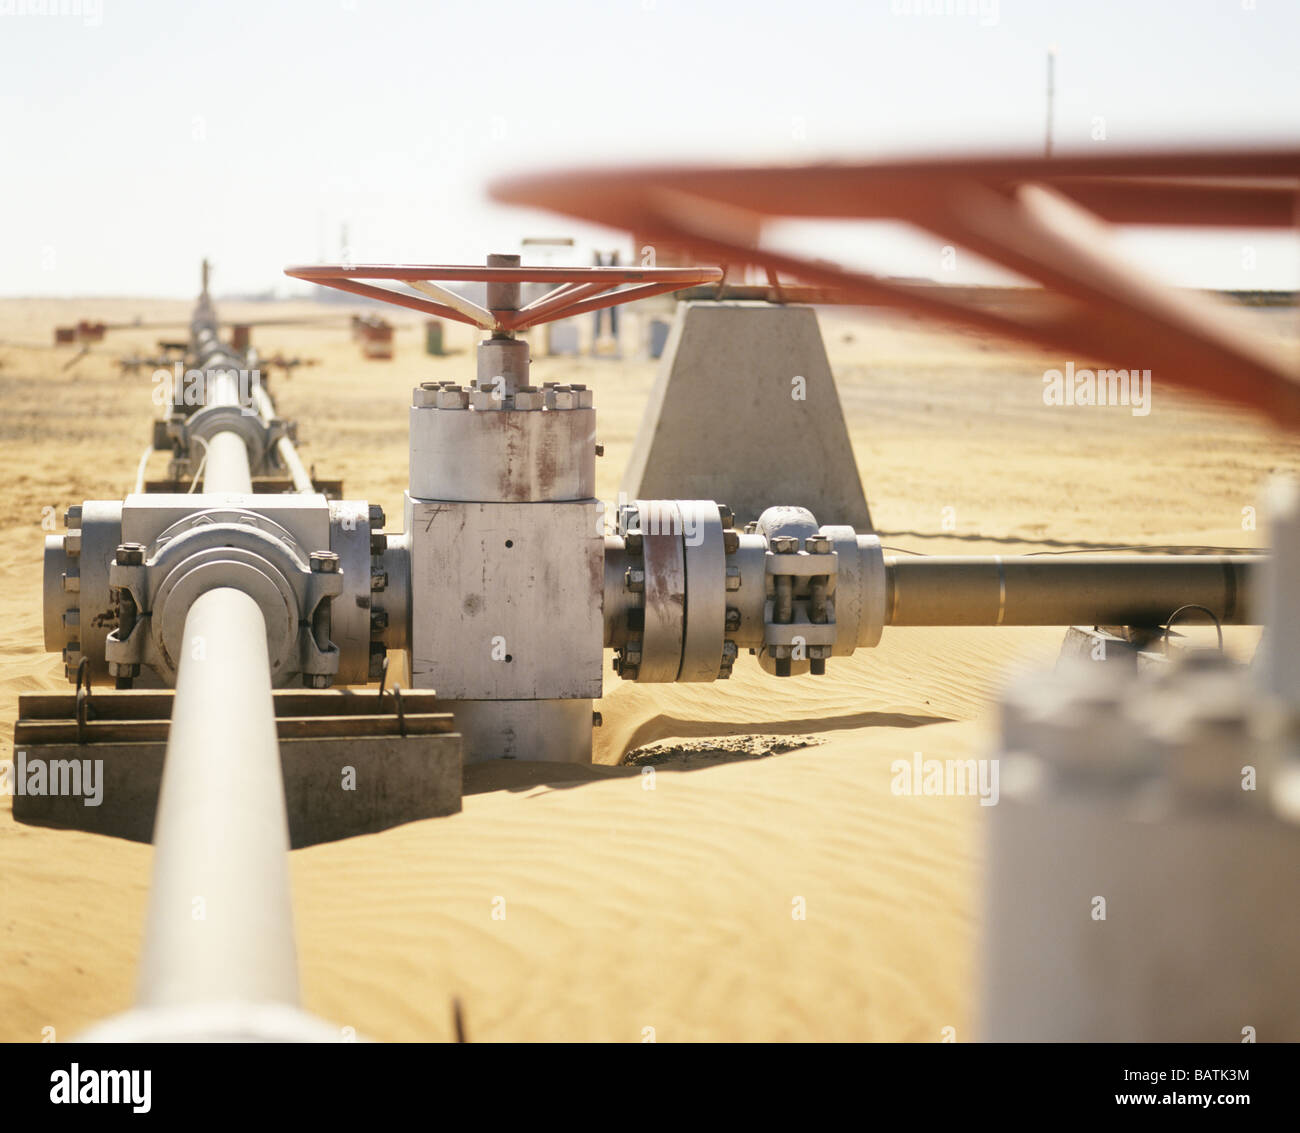 Gas well valve in a gas pipeline. Photographedin the United Arab Emirates. Stock Photo